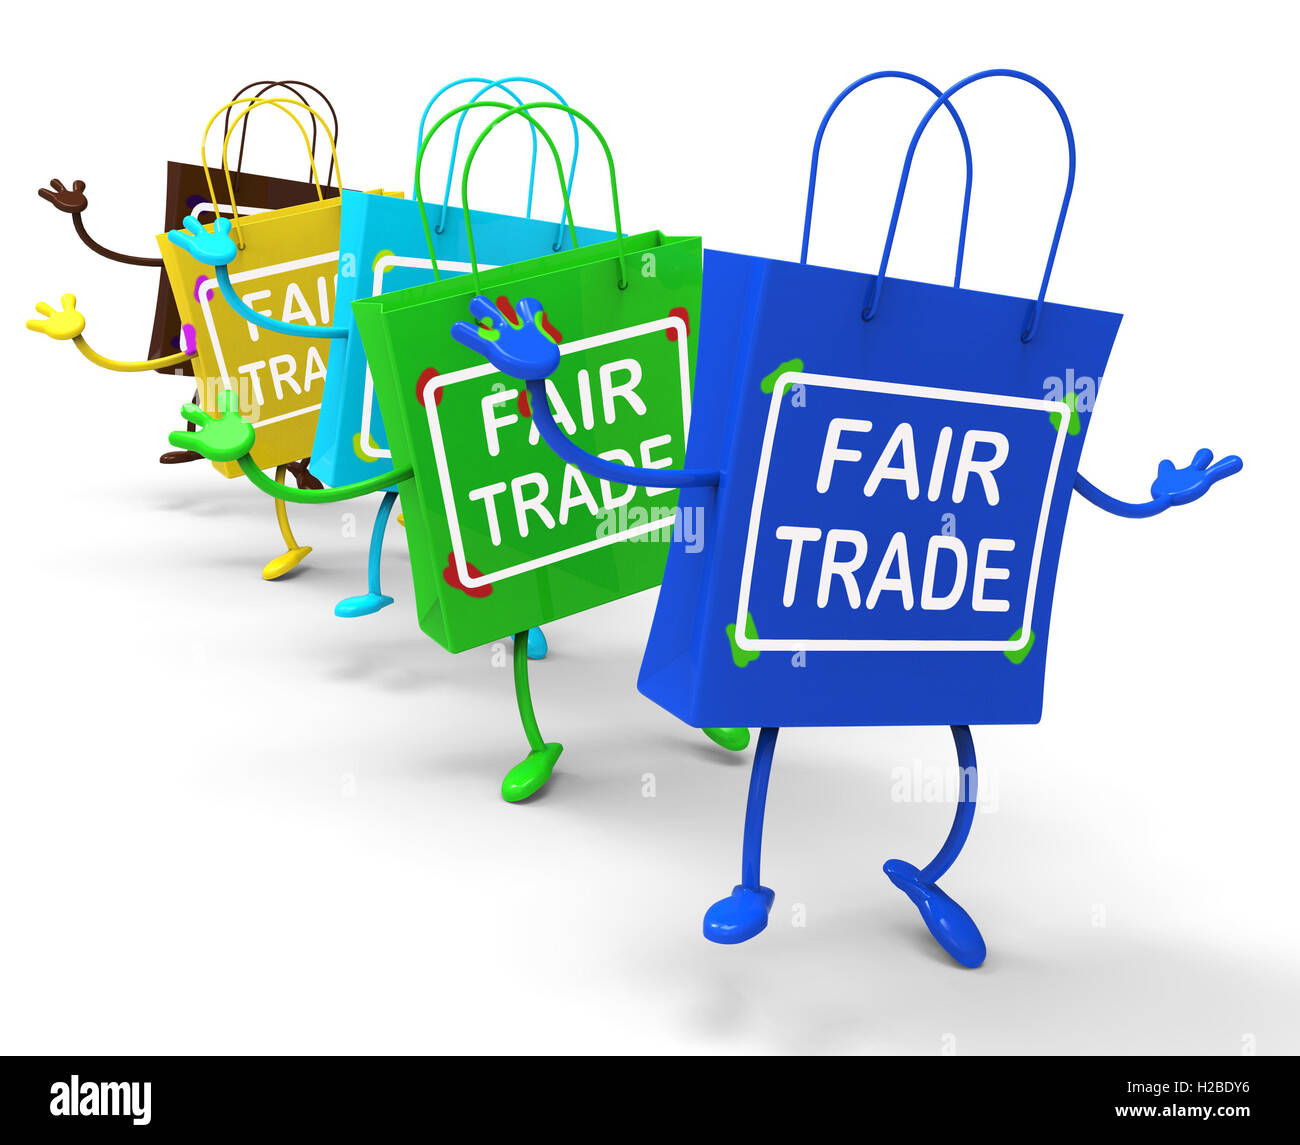 Fair Trade Bags Show Equal Deals and Exchange Stock Photo